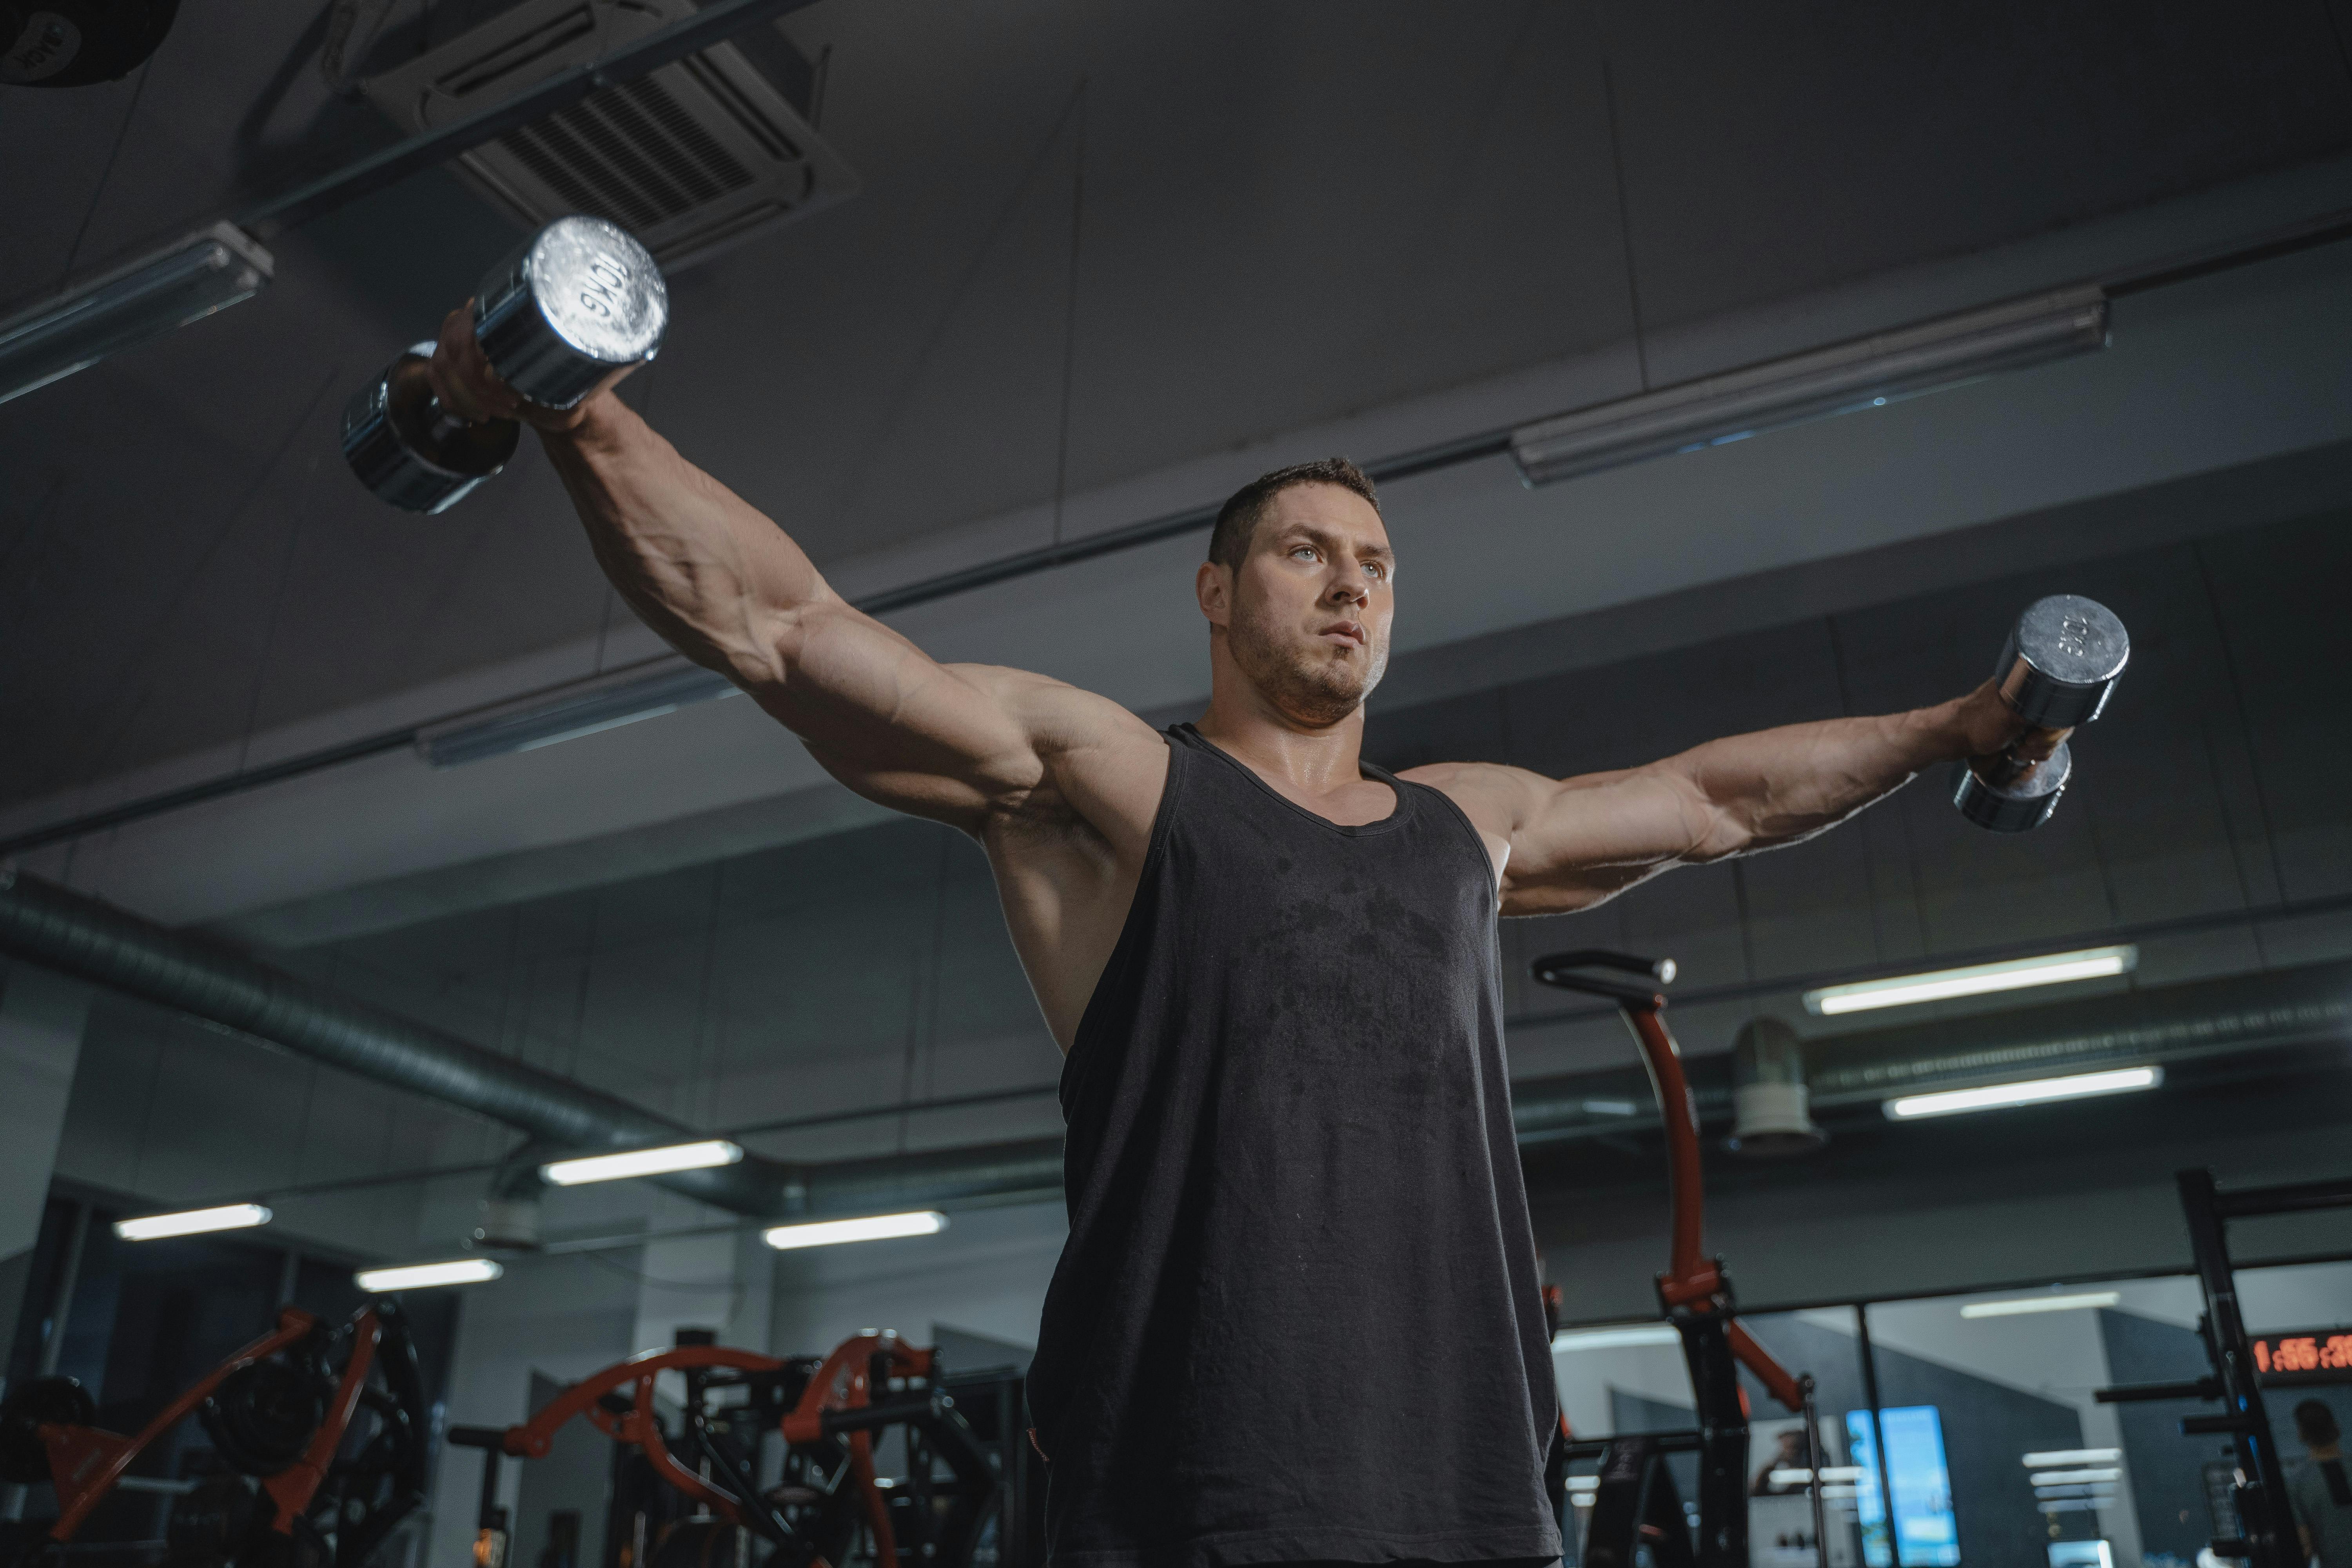 Explode your biceps with supersets